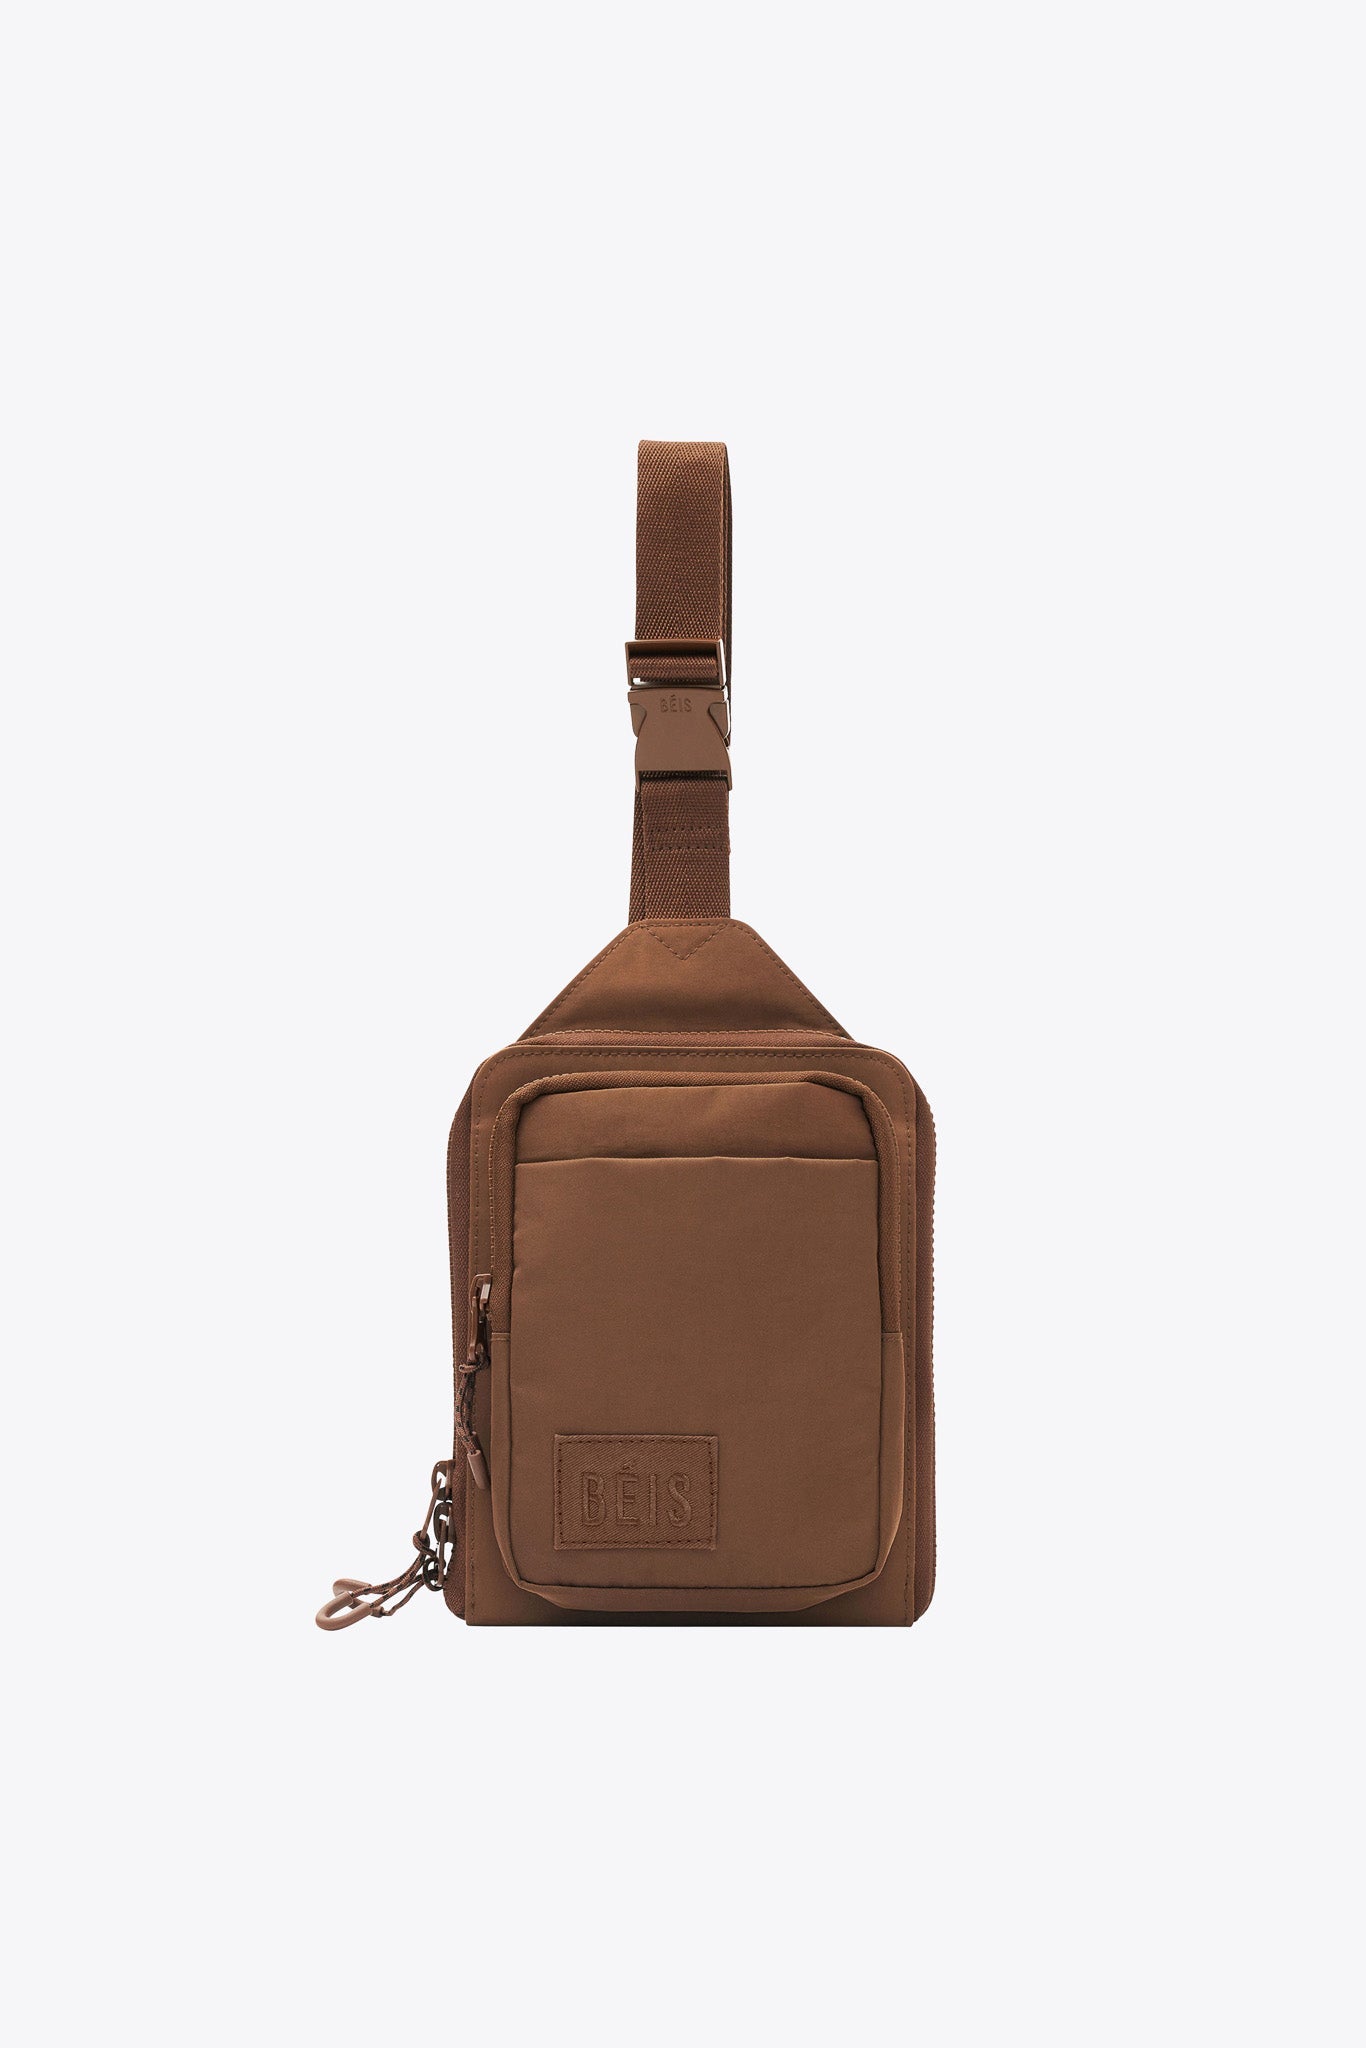 The Sport Sling in Maple